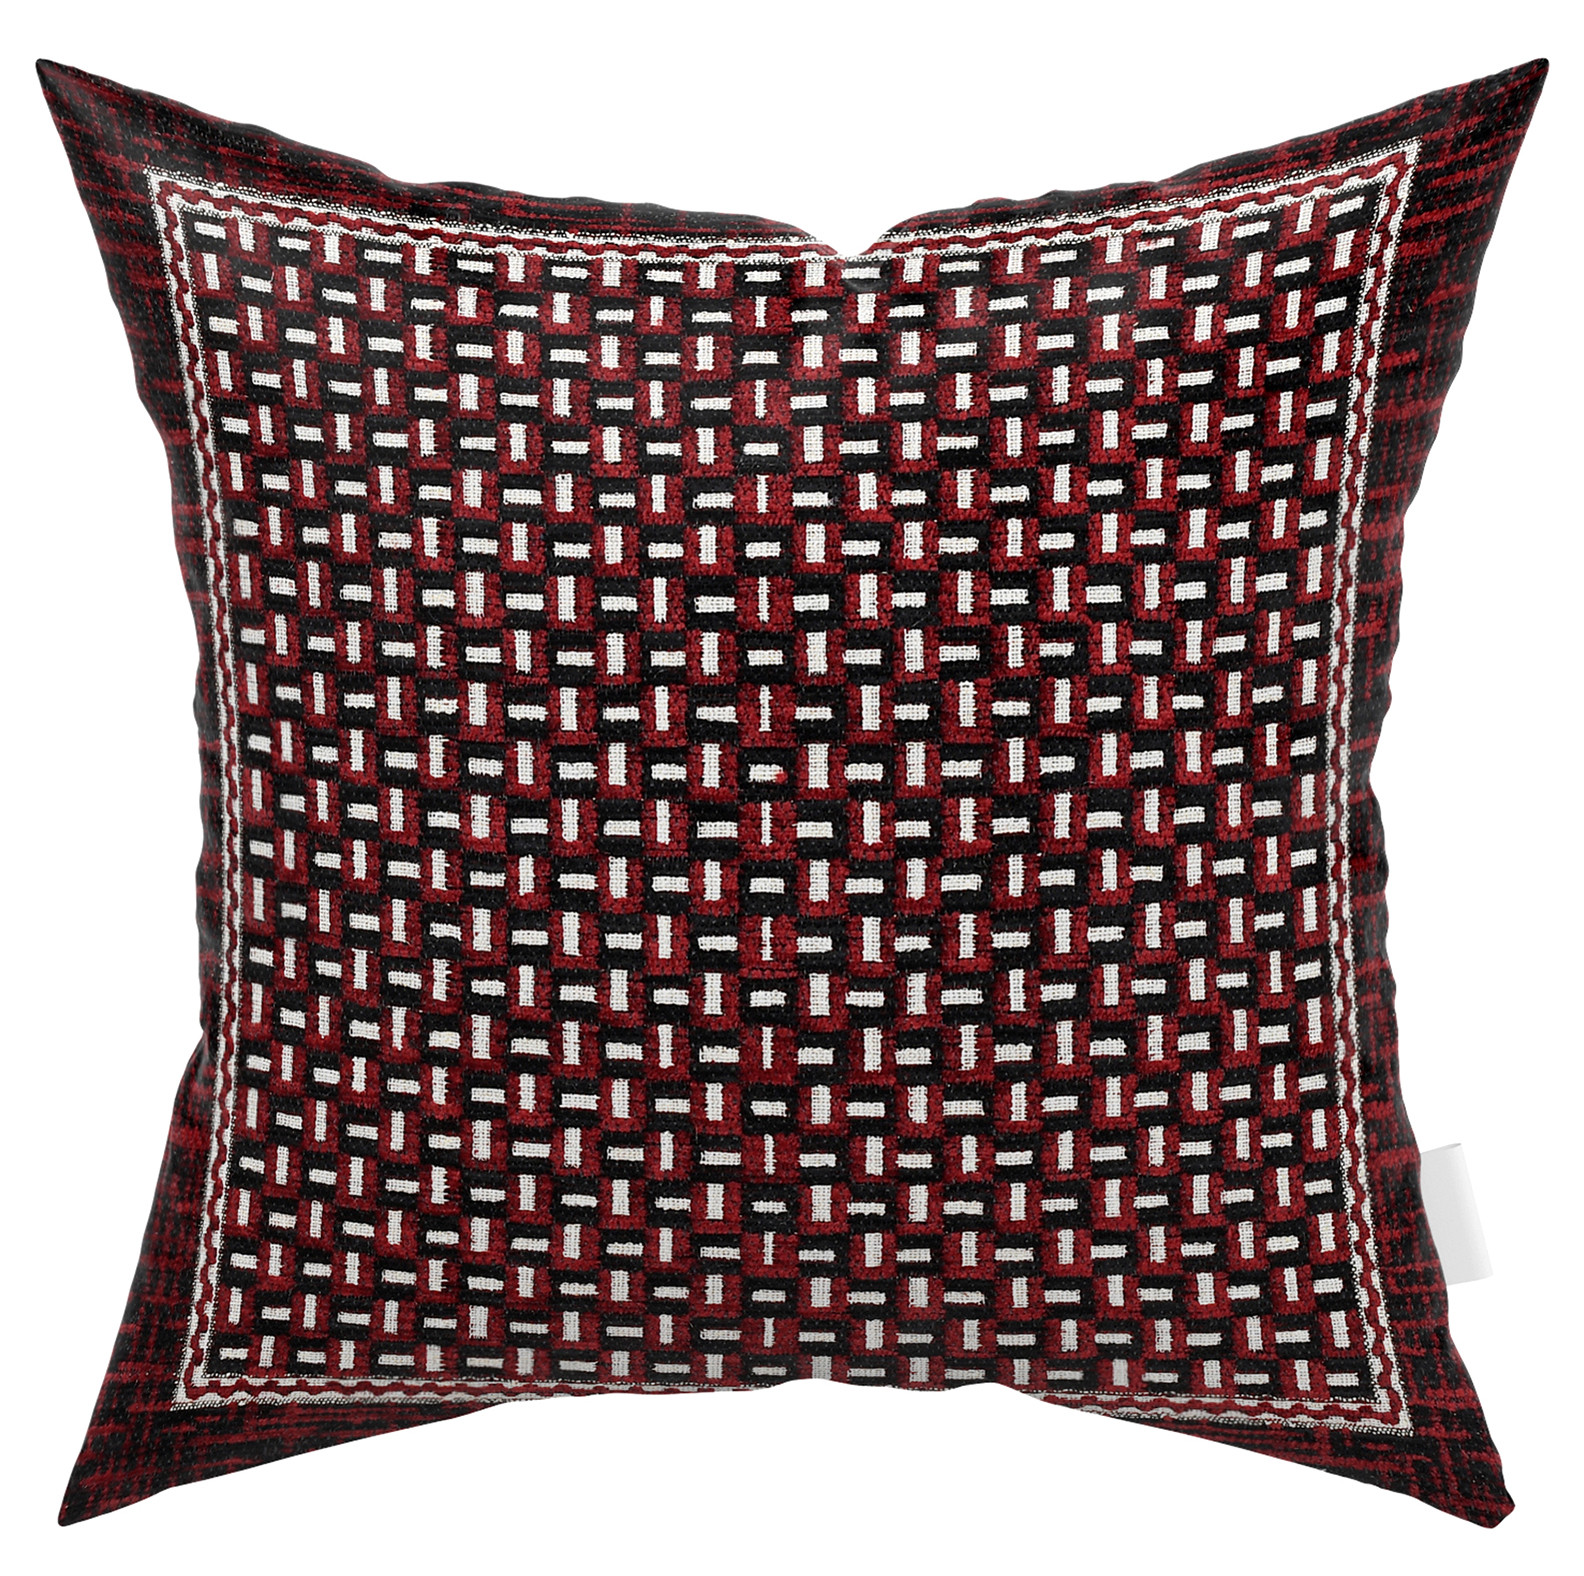 Kuber Industries Velvet Check Design Soft Decorative Square Throw Pillow Cover, Cushion Covers, Pillow Case For Sofa Couch Bed Chair 16x16 Inch-(Maroon)